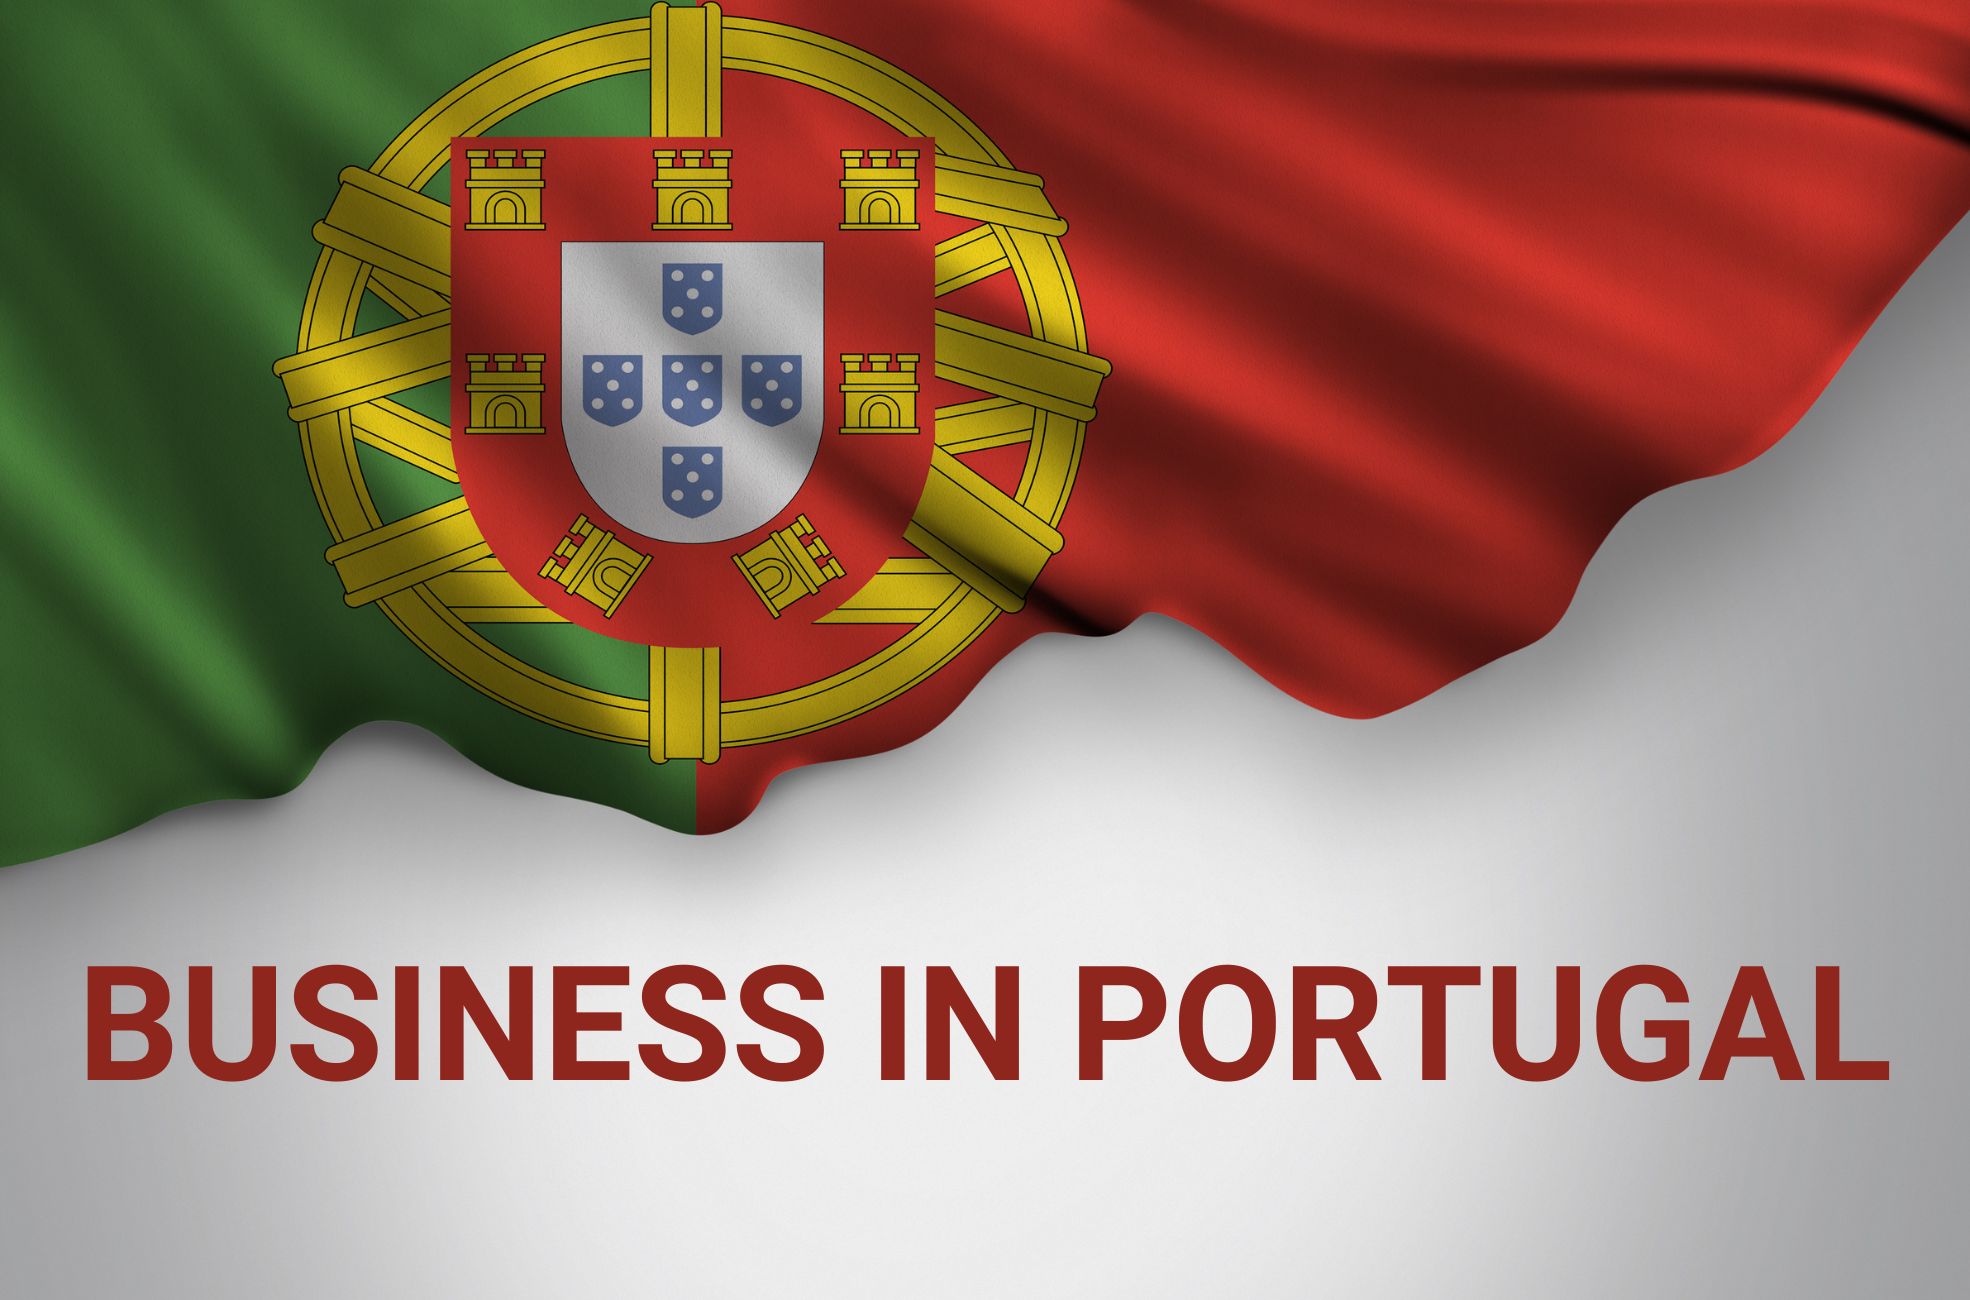 Portuguese Flag With "Business In Portugal" Written Underneath